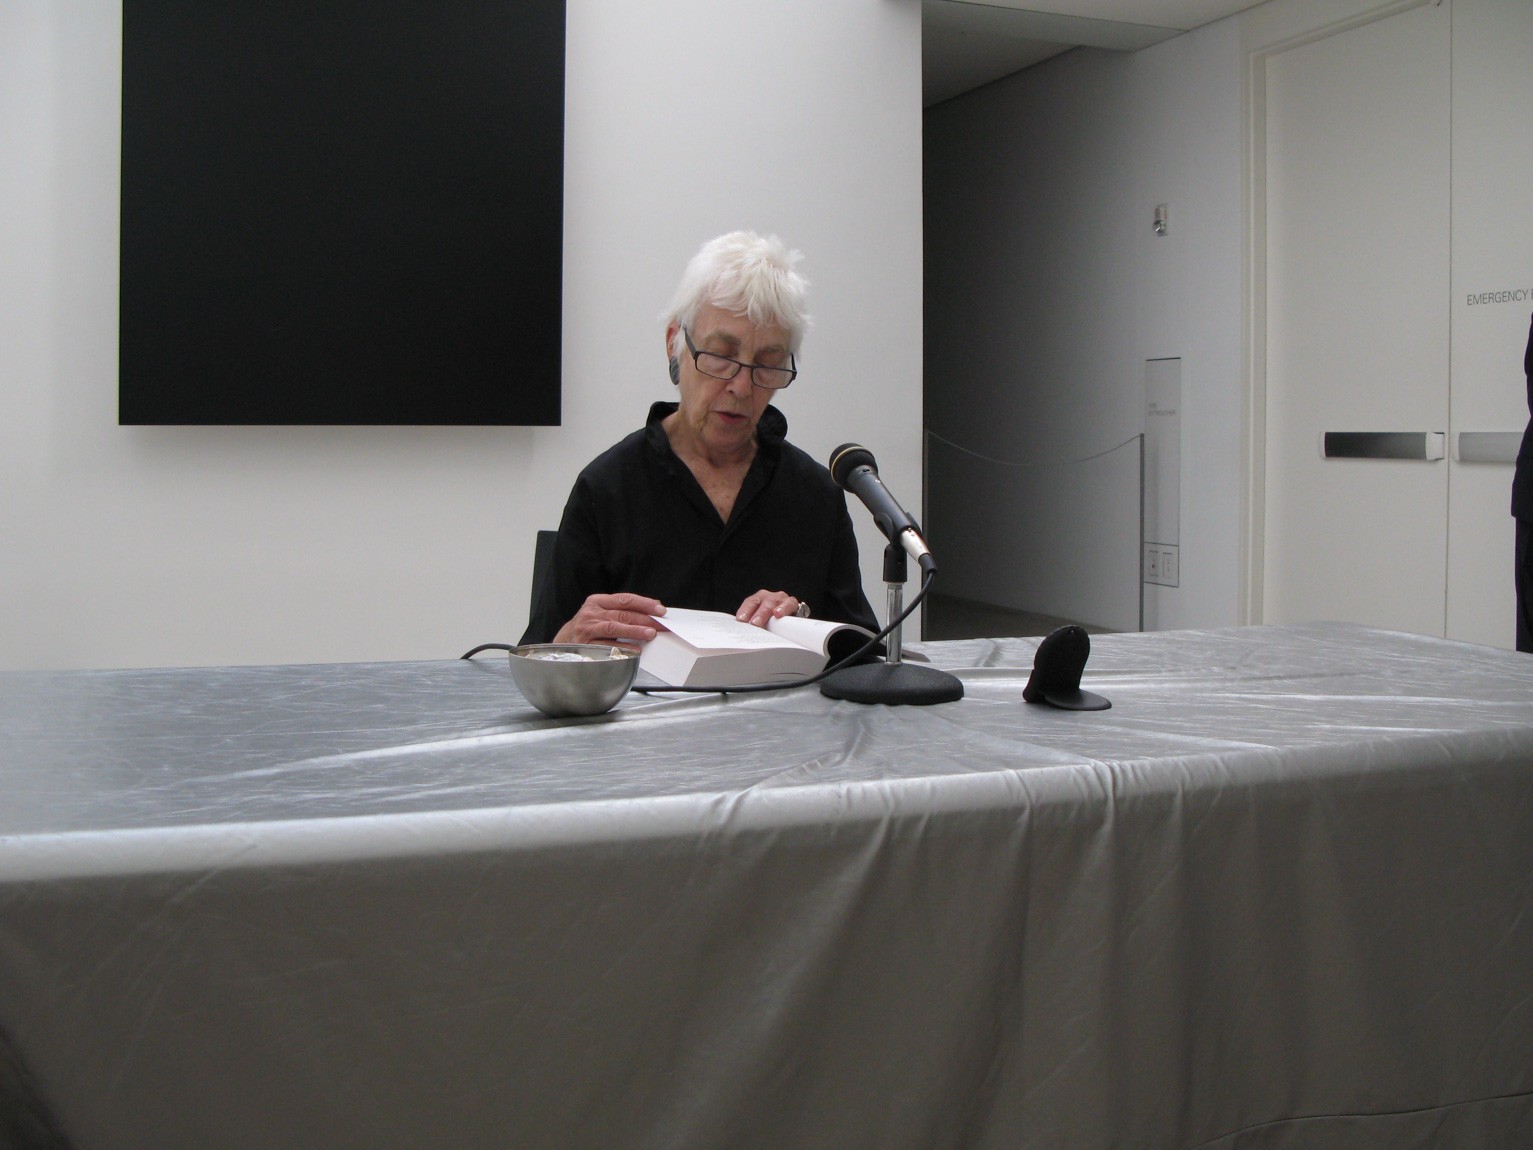 Ms. Pulitzer sits at a table in front of Ellsworth Kelly's "Blue Black" and reads from a page into a microphone.